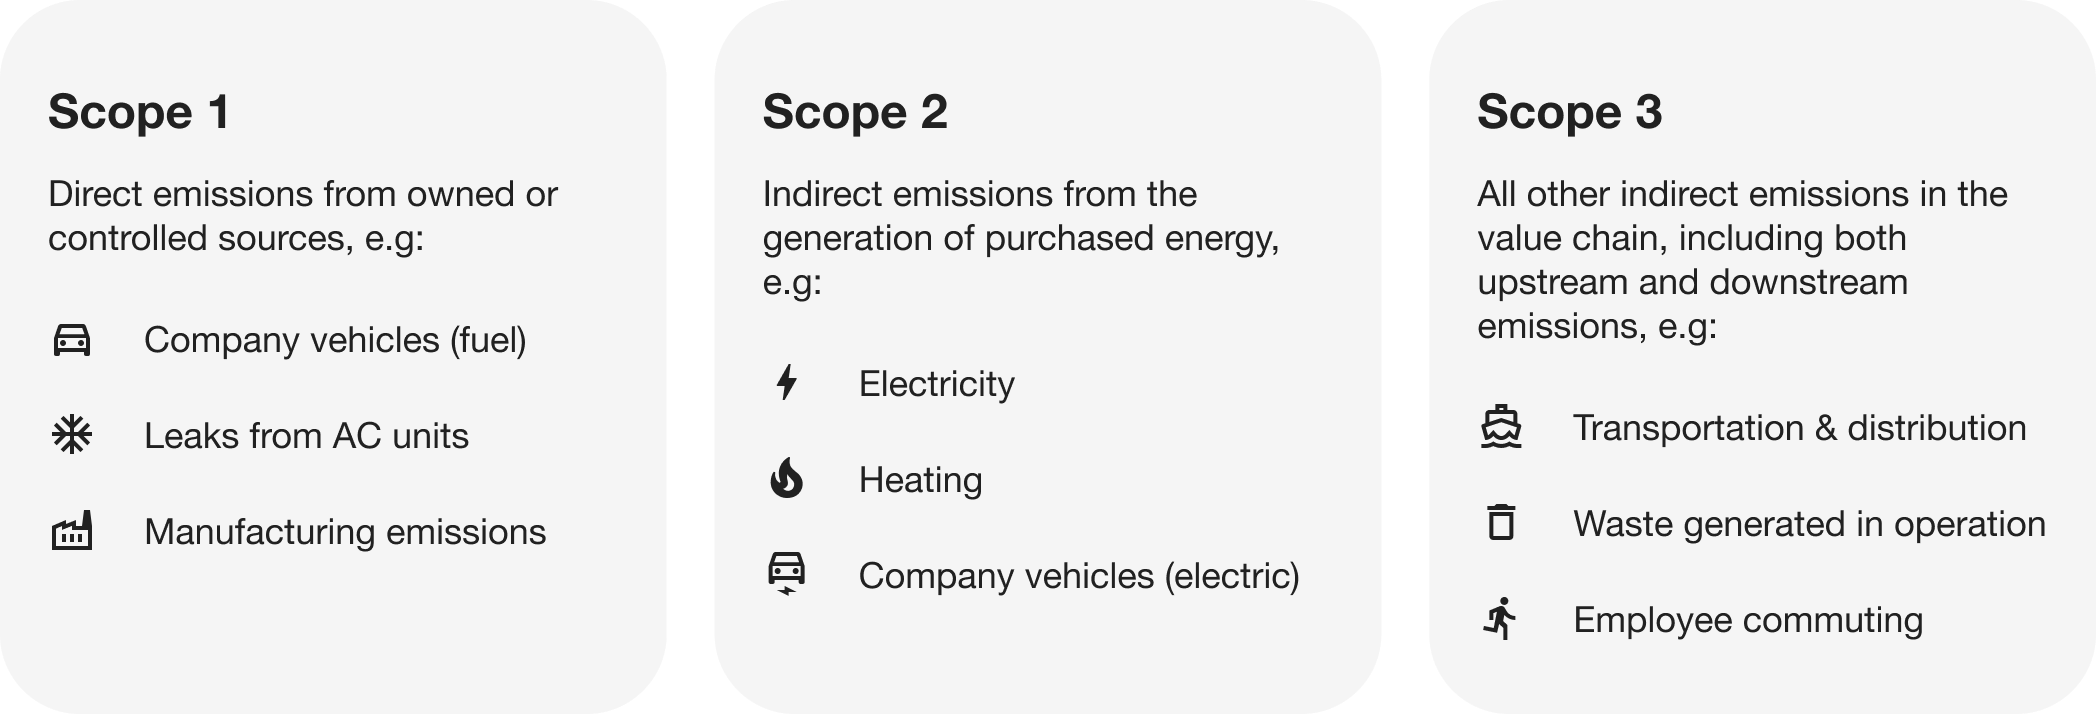 Description of scope 1, 2 and 3 emissions